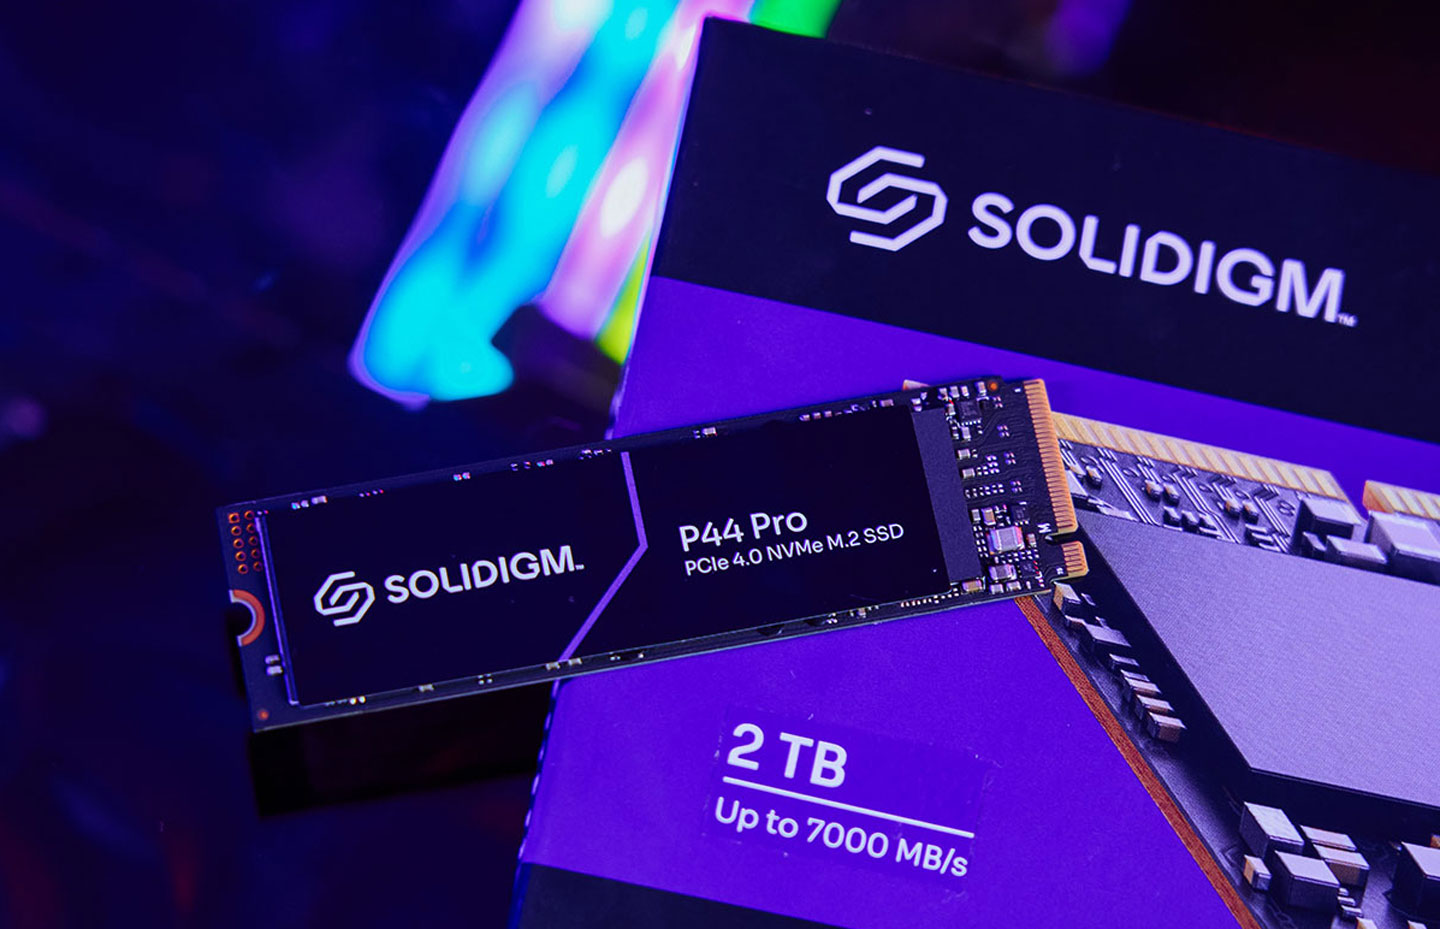 The front of the SOLIDIGM P44 Pro body is covered by a label sticker, which covers the components below.